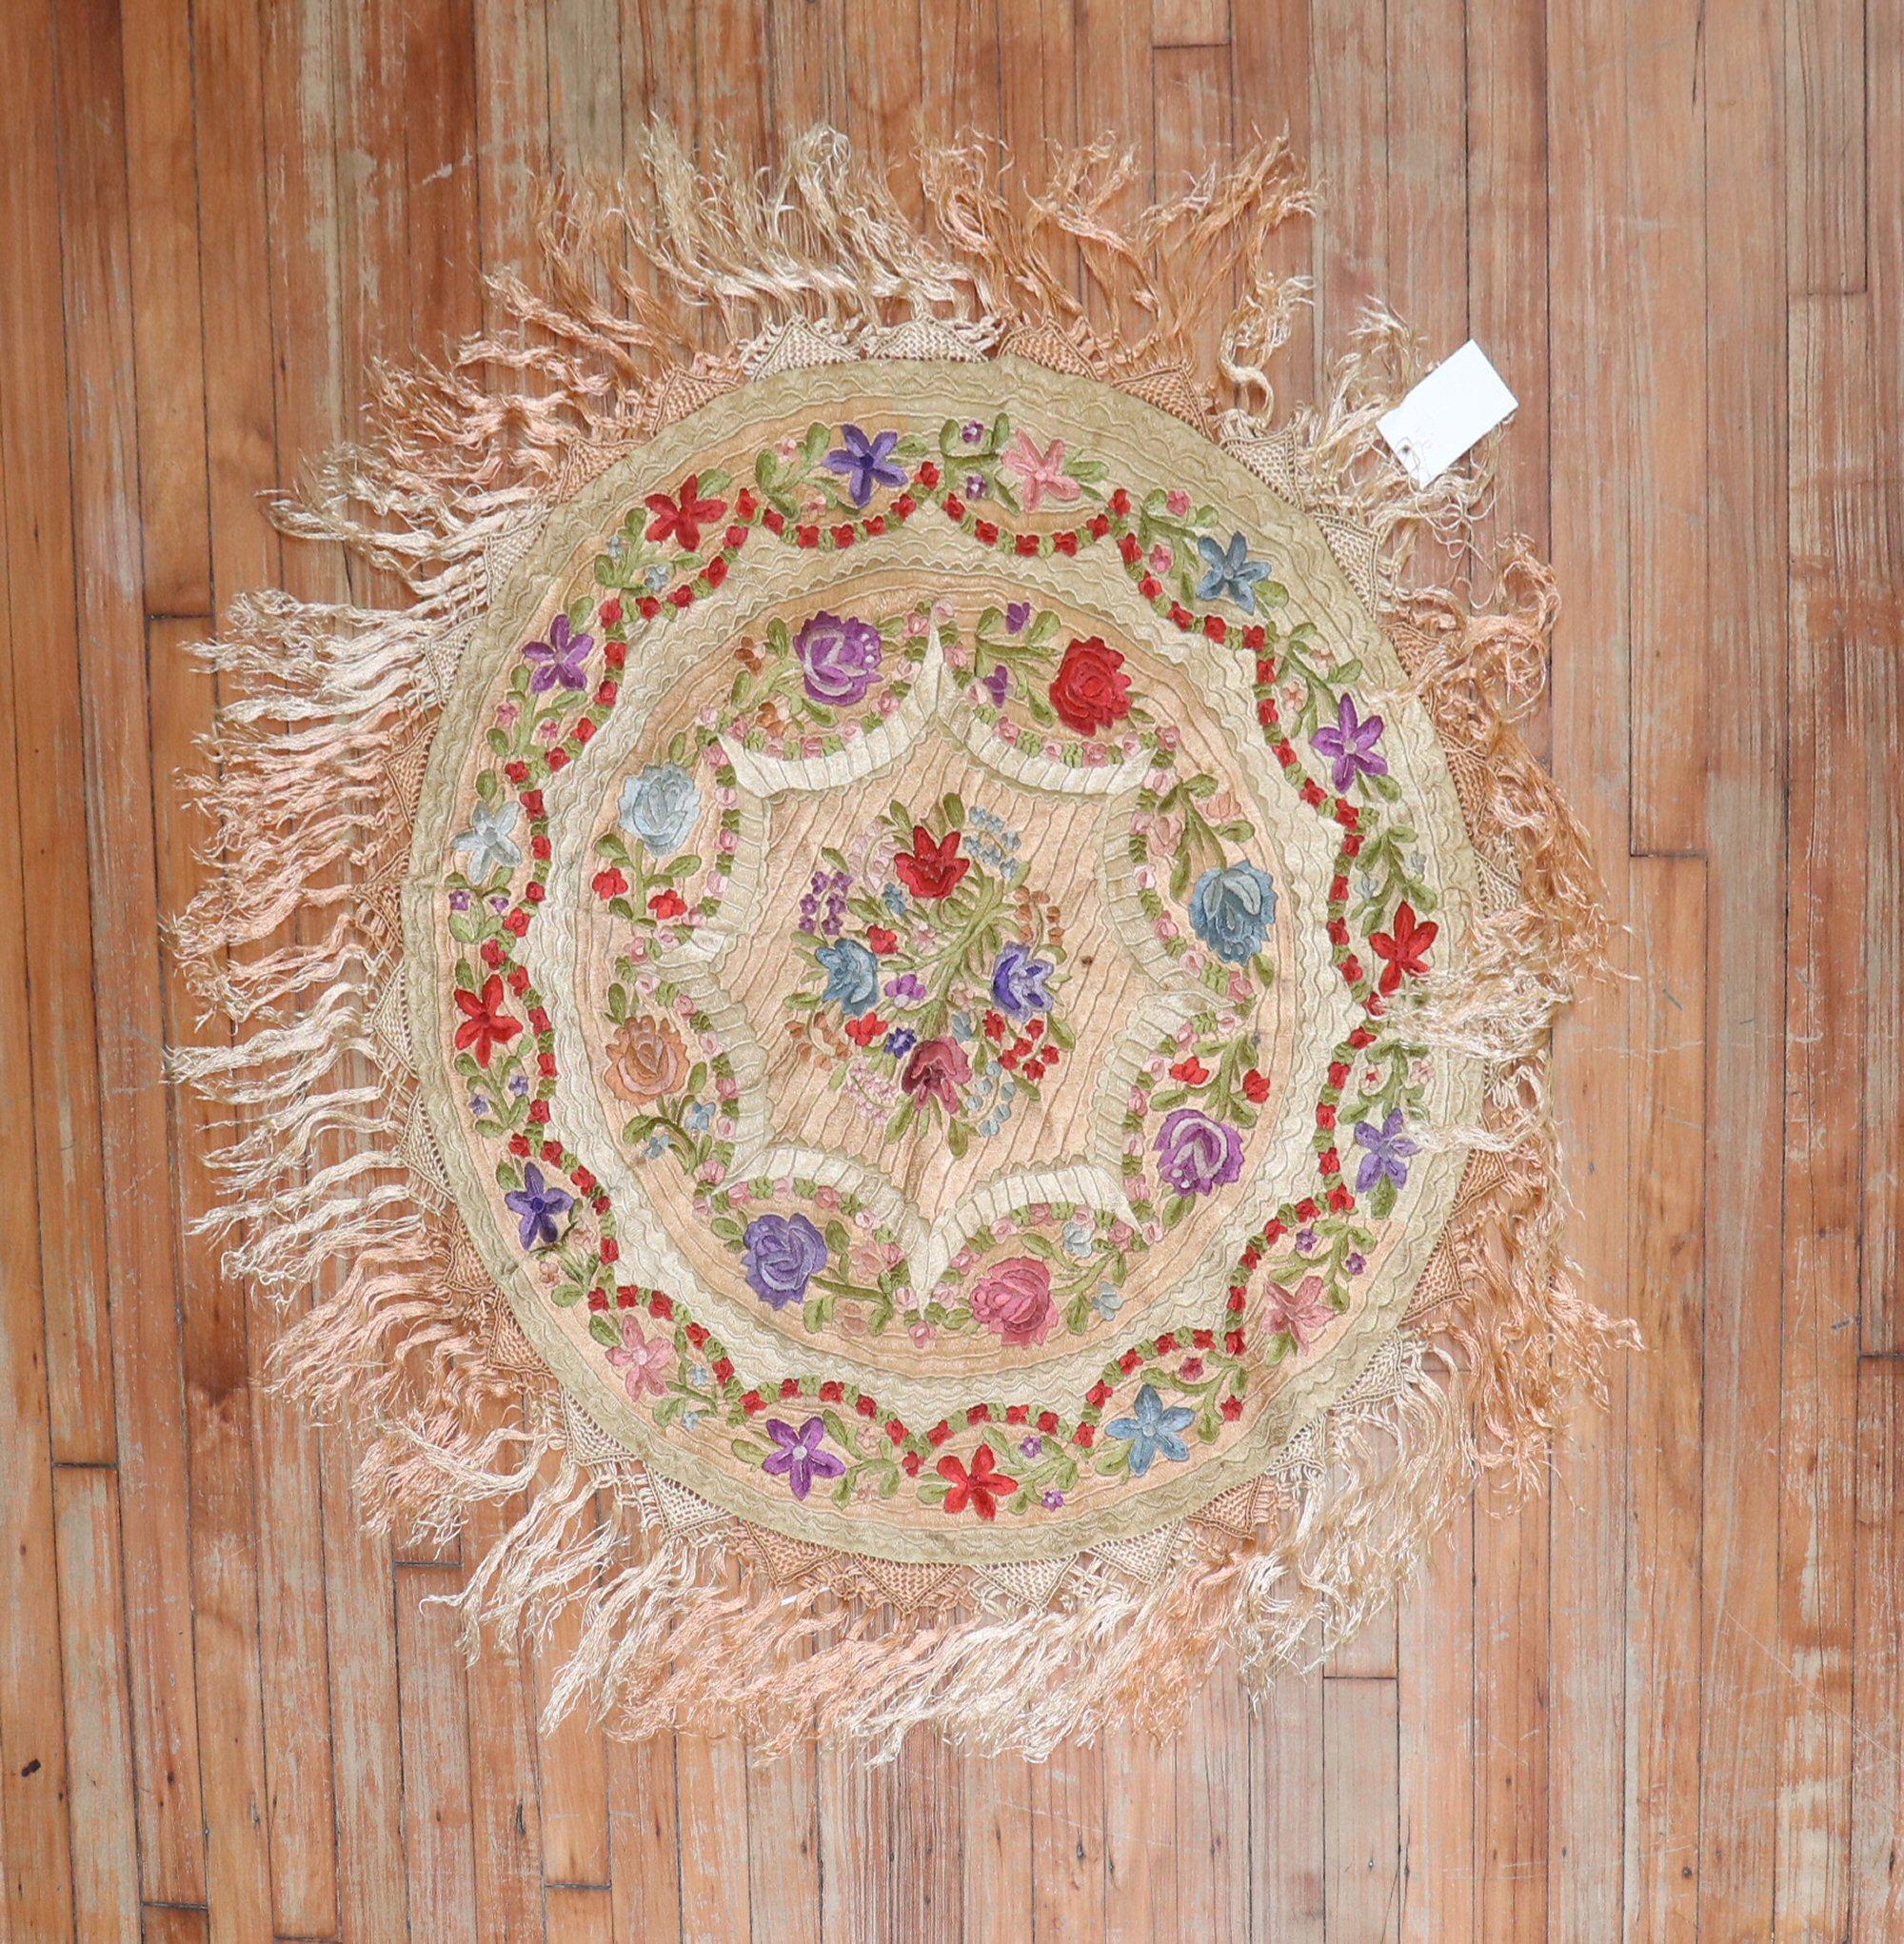 One of a kind colorful hand-embroidered Hungarian textile from the late 20th century

Measures: 33” x 34”.